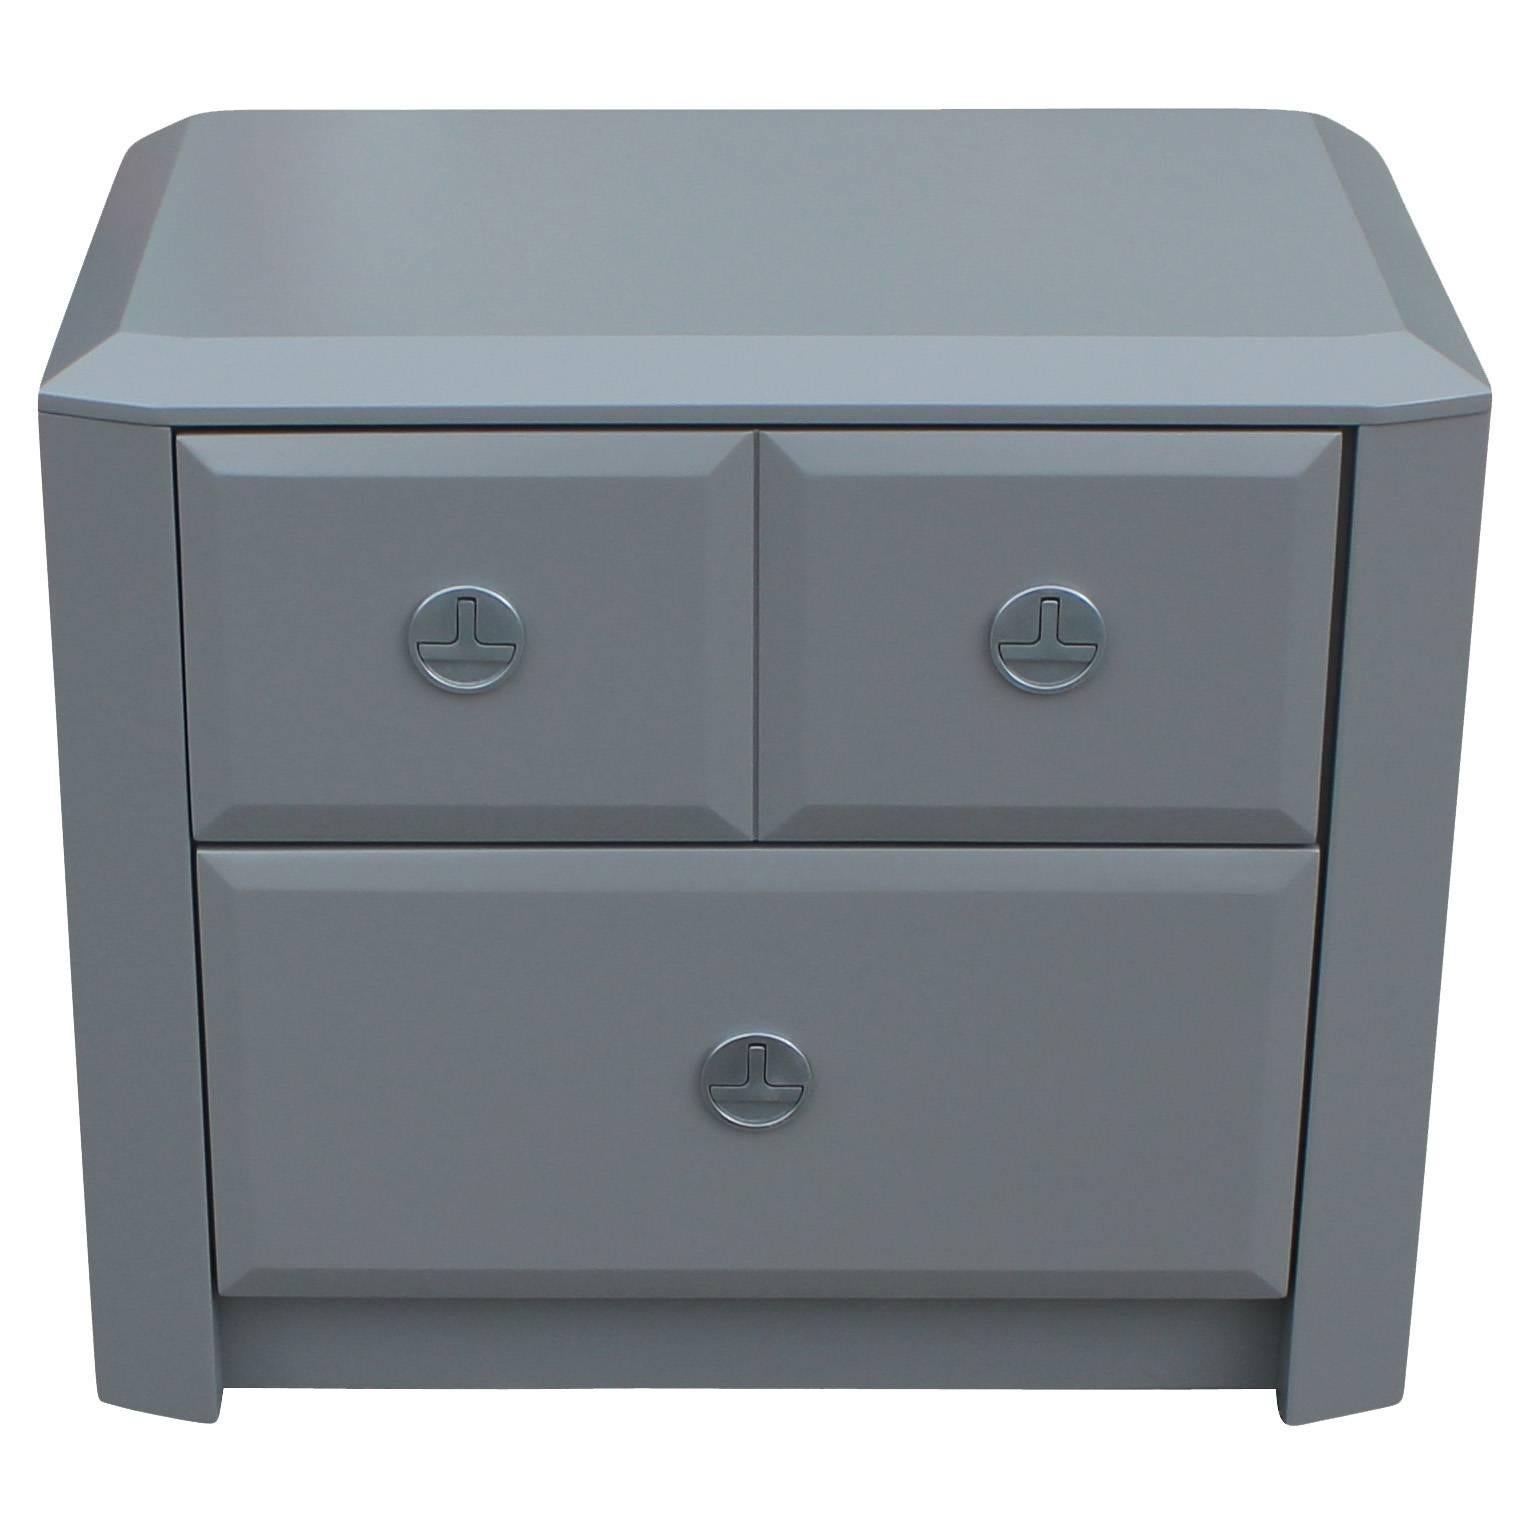 Excellent pair of grey lacquered nightstands. Gem cut or beveled details add interest to the piece. Round, brushed nickel Campaign style hardware. Two drawers provide excellent storage.